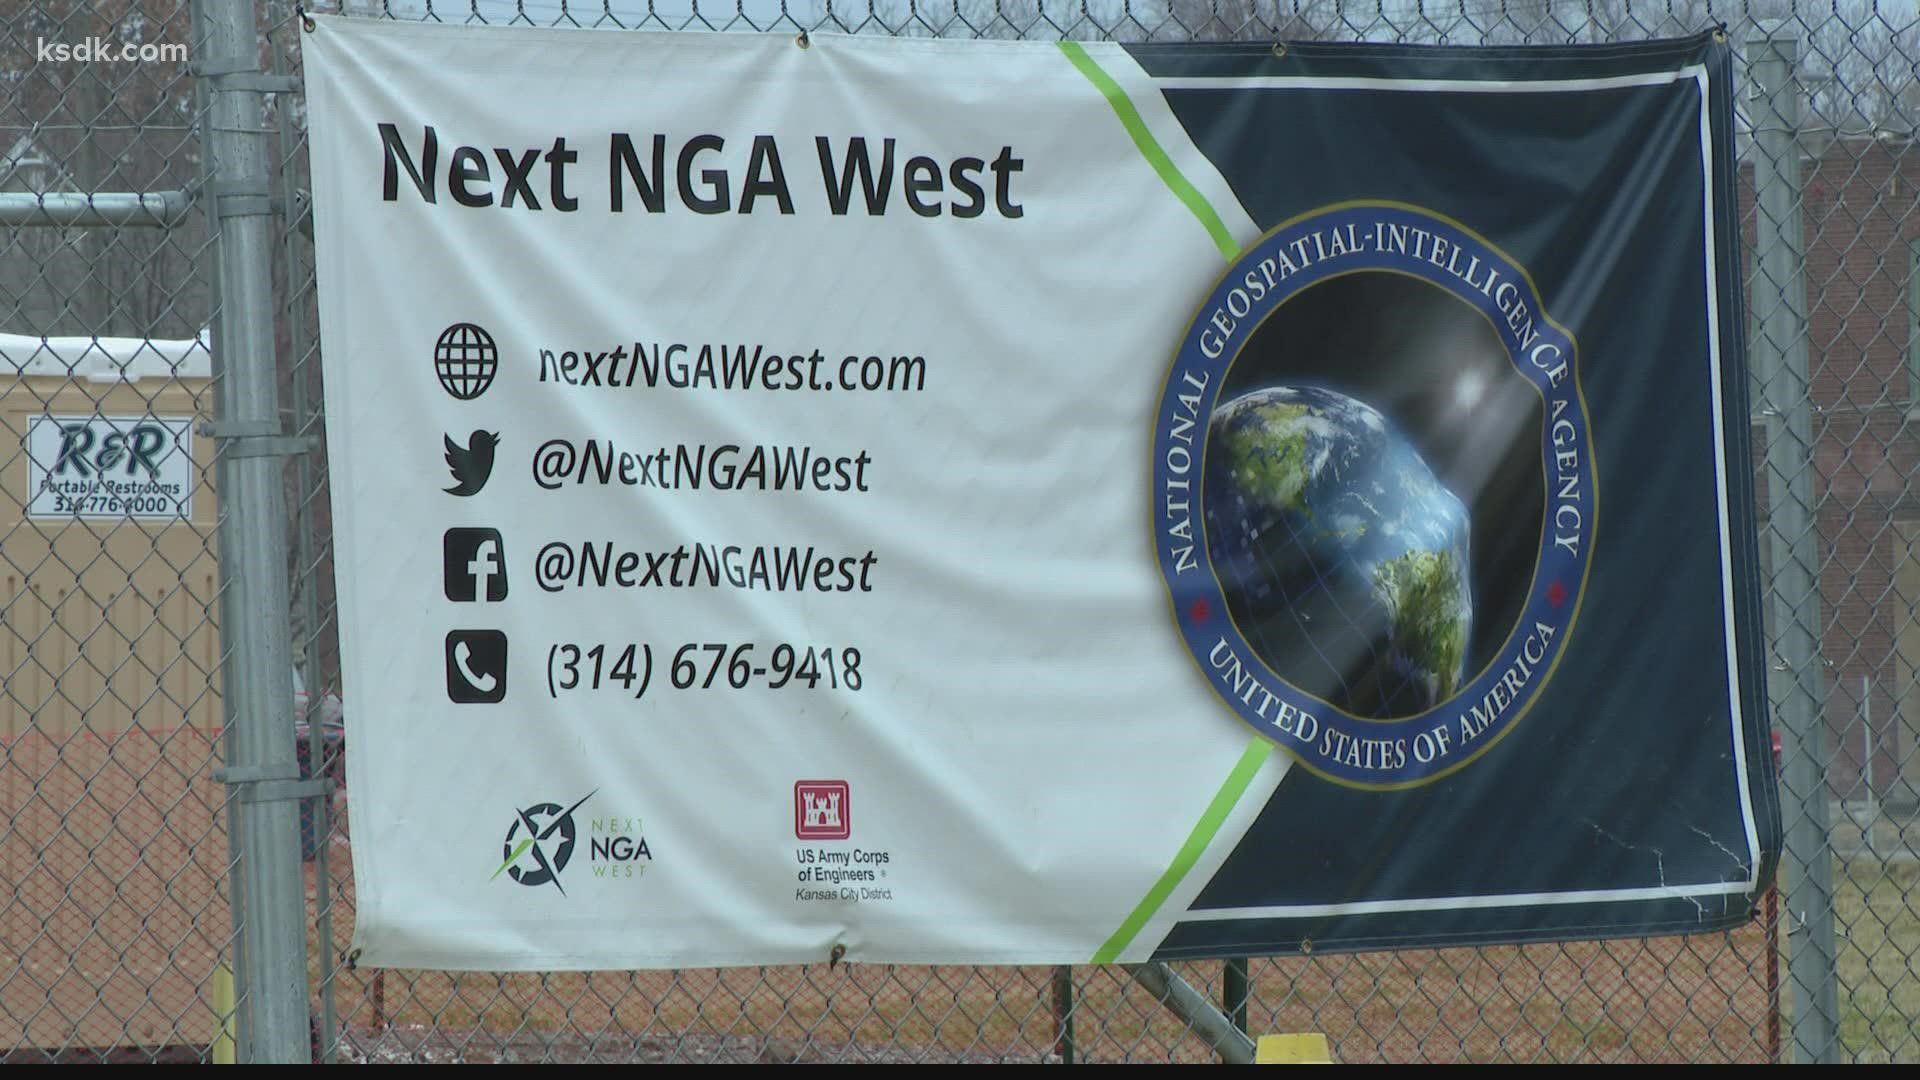 Long before the new National Geospatial-Intelligence facility opens in North St. Louis, the world's largest geospatial conference launched in St. Louis today.